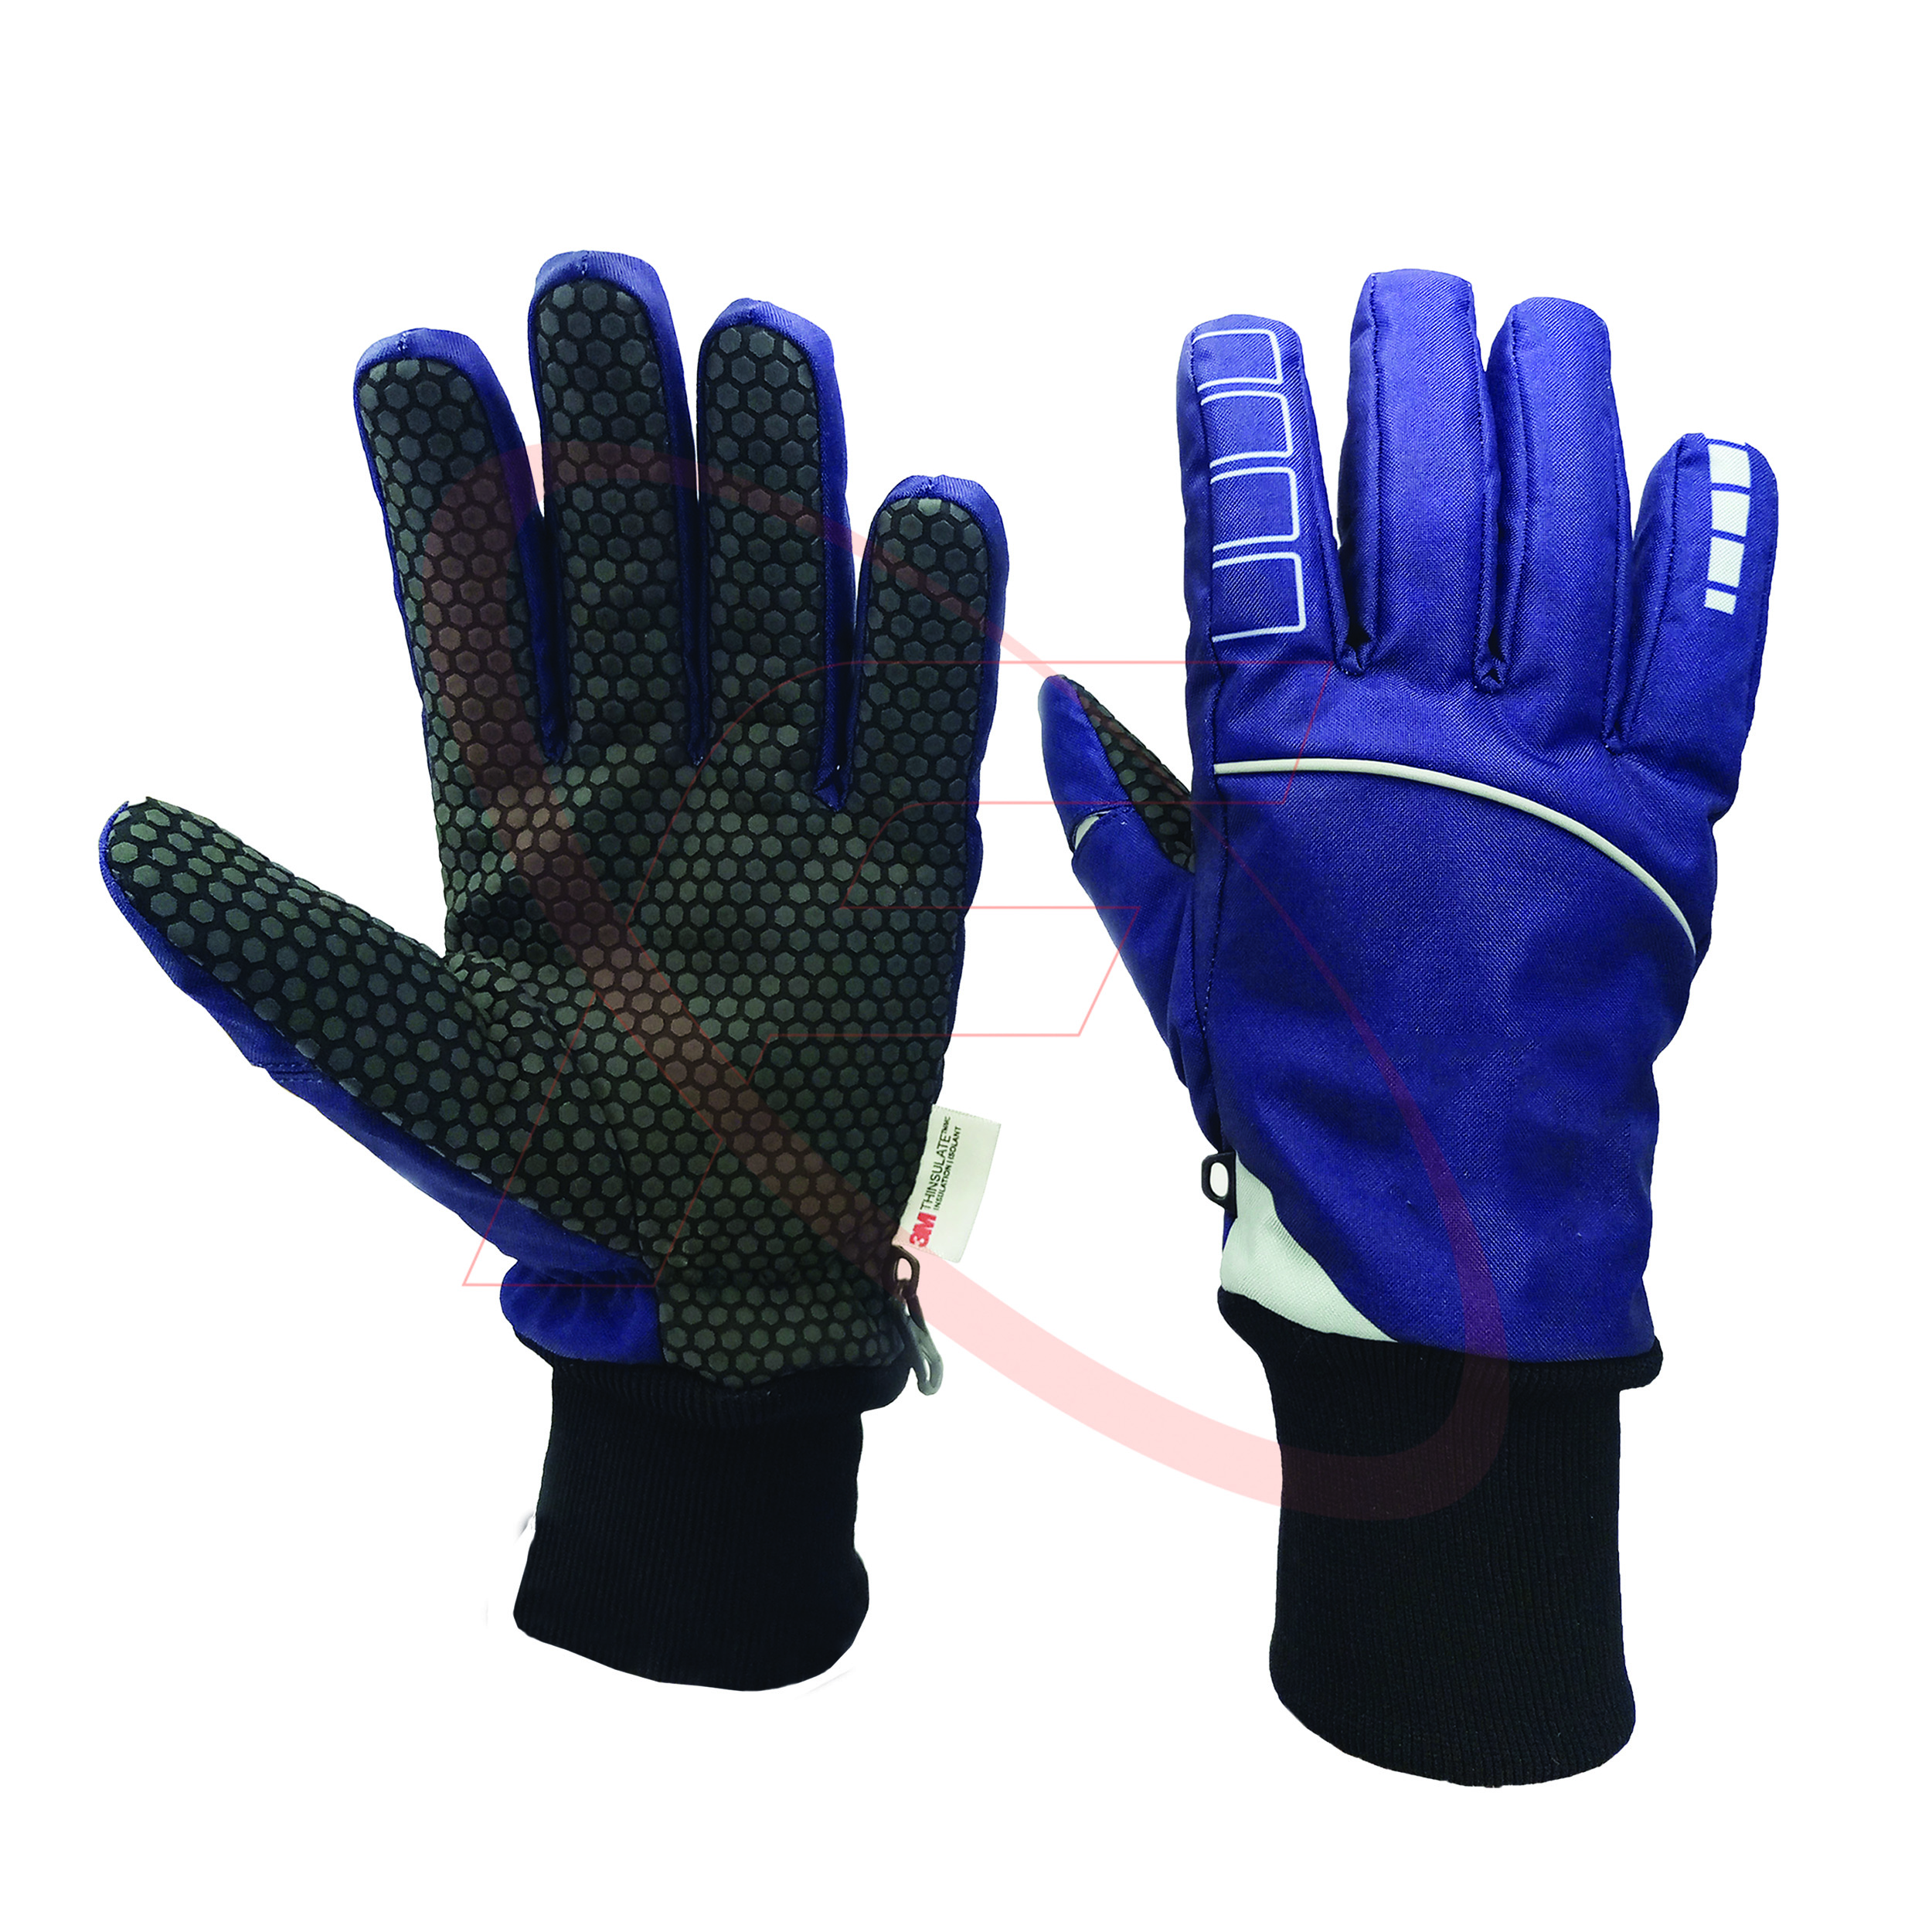 Best Winter Mechanic Gloves in Synthetic Leather with Matt Finished Silicon Print Palm Best Weather Resistant Winter Gloves